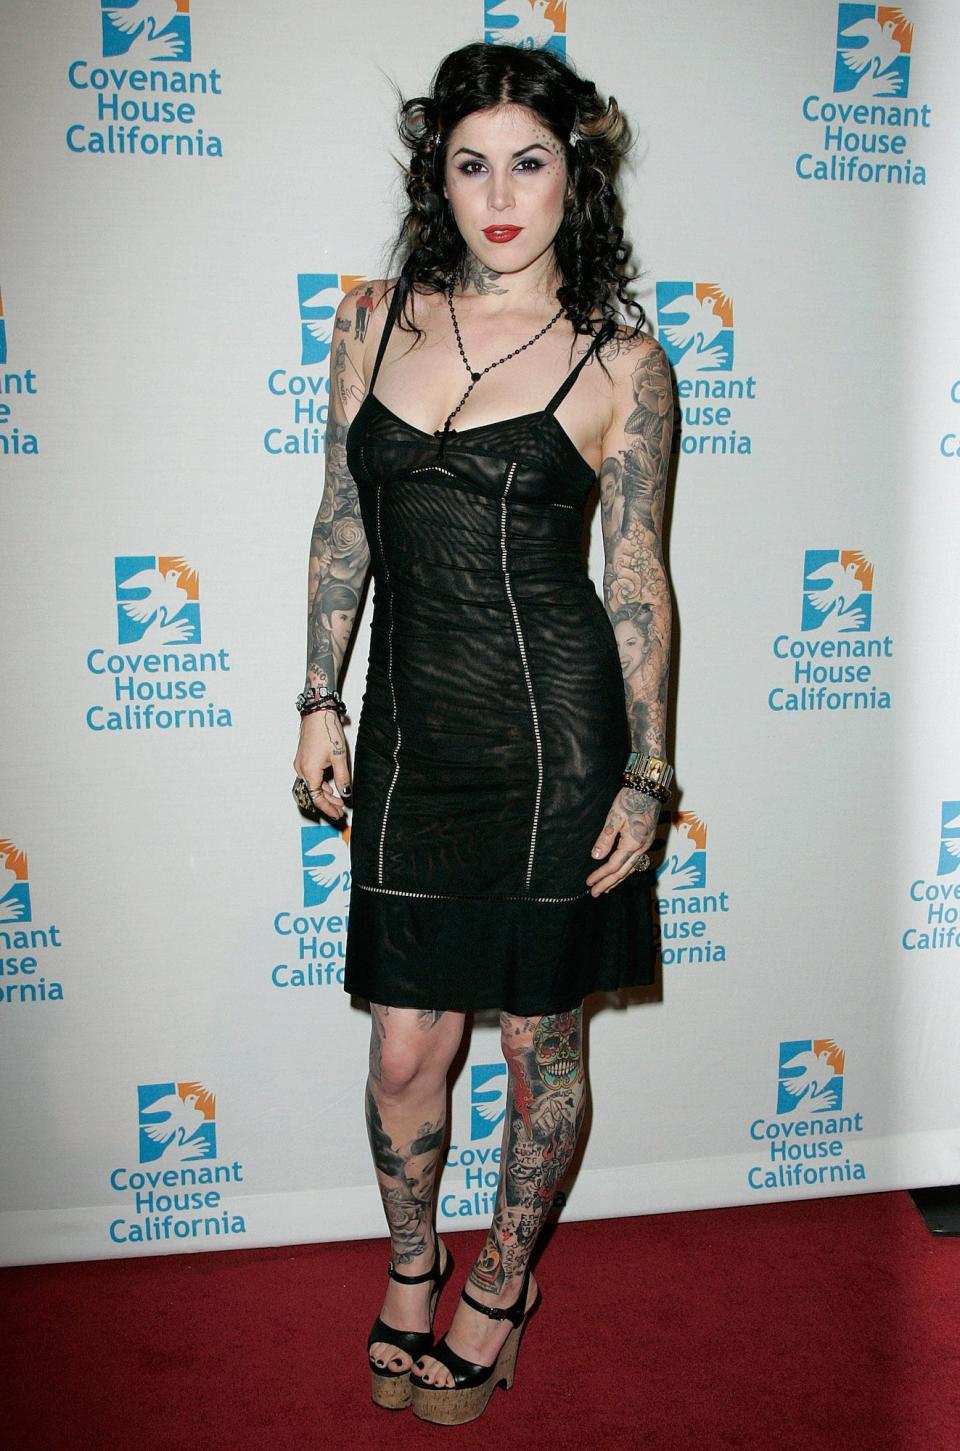 Kat Von D at an awards gala in Beverly Hills, California, on May 9, 2008.